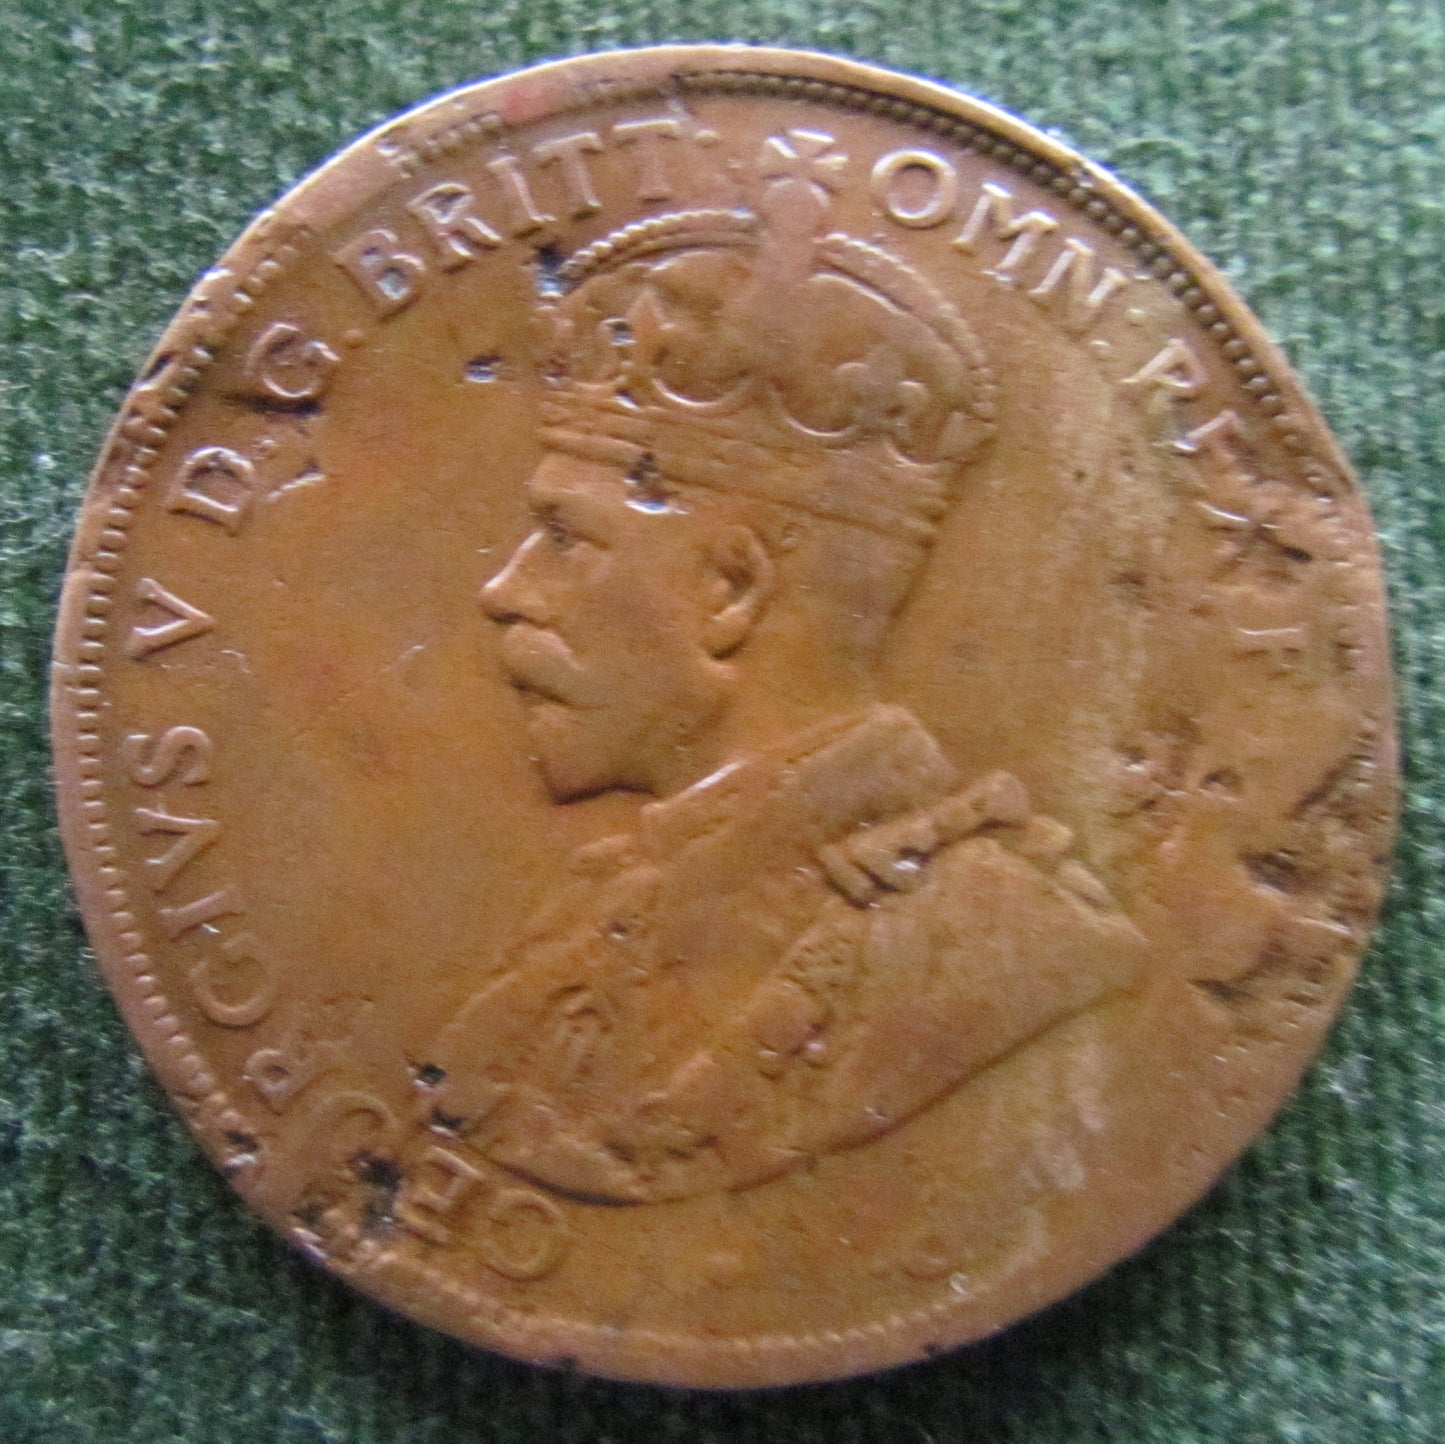 Australian 1922 1d 1 Penny King George V Coin - Variety Die Issues